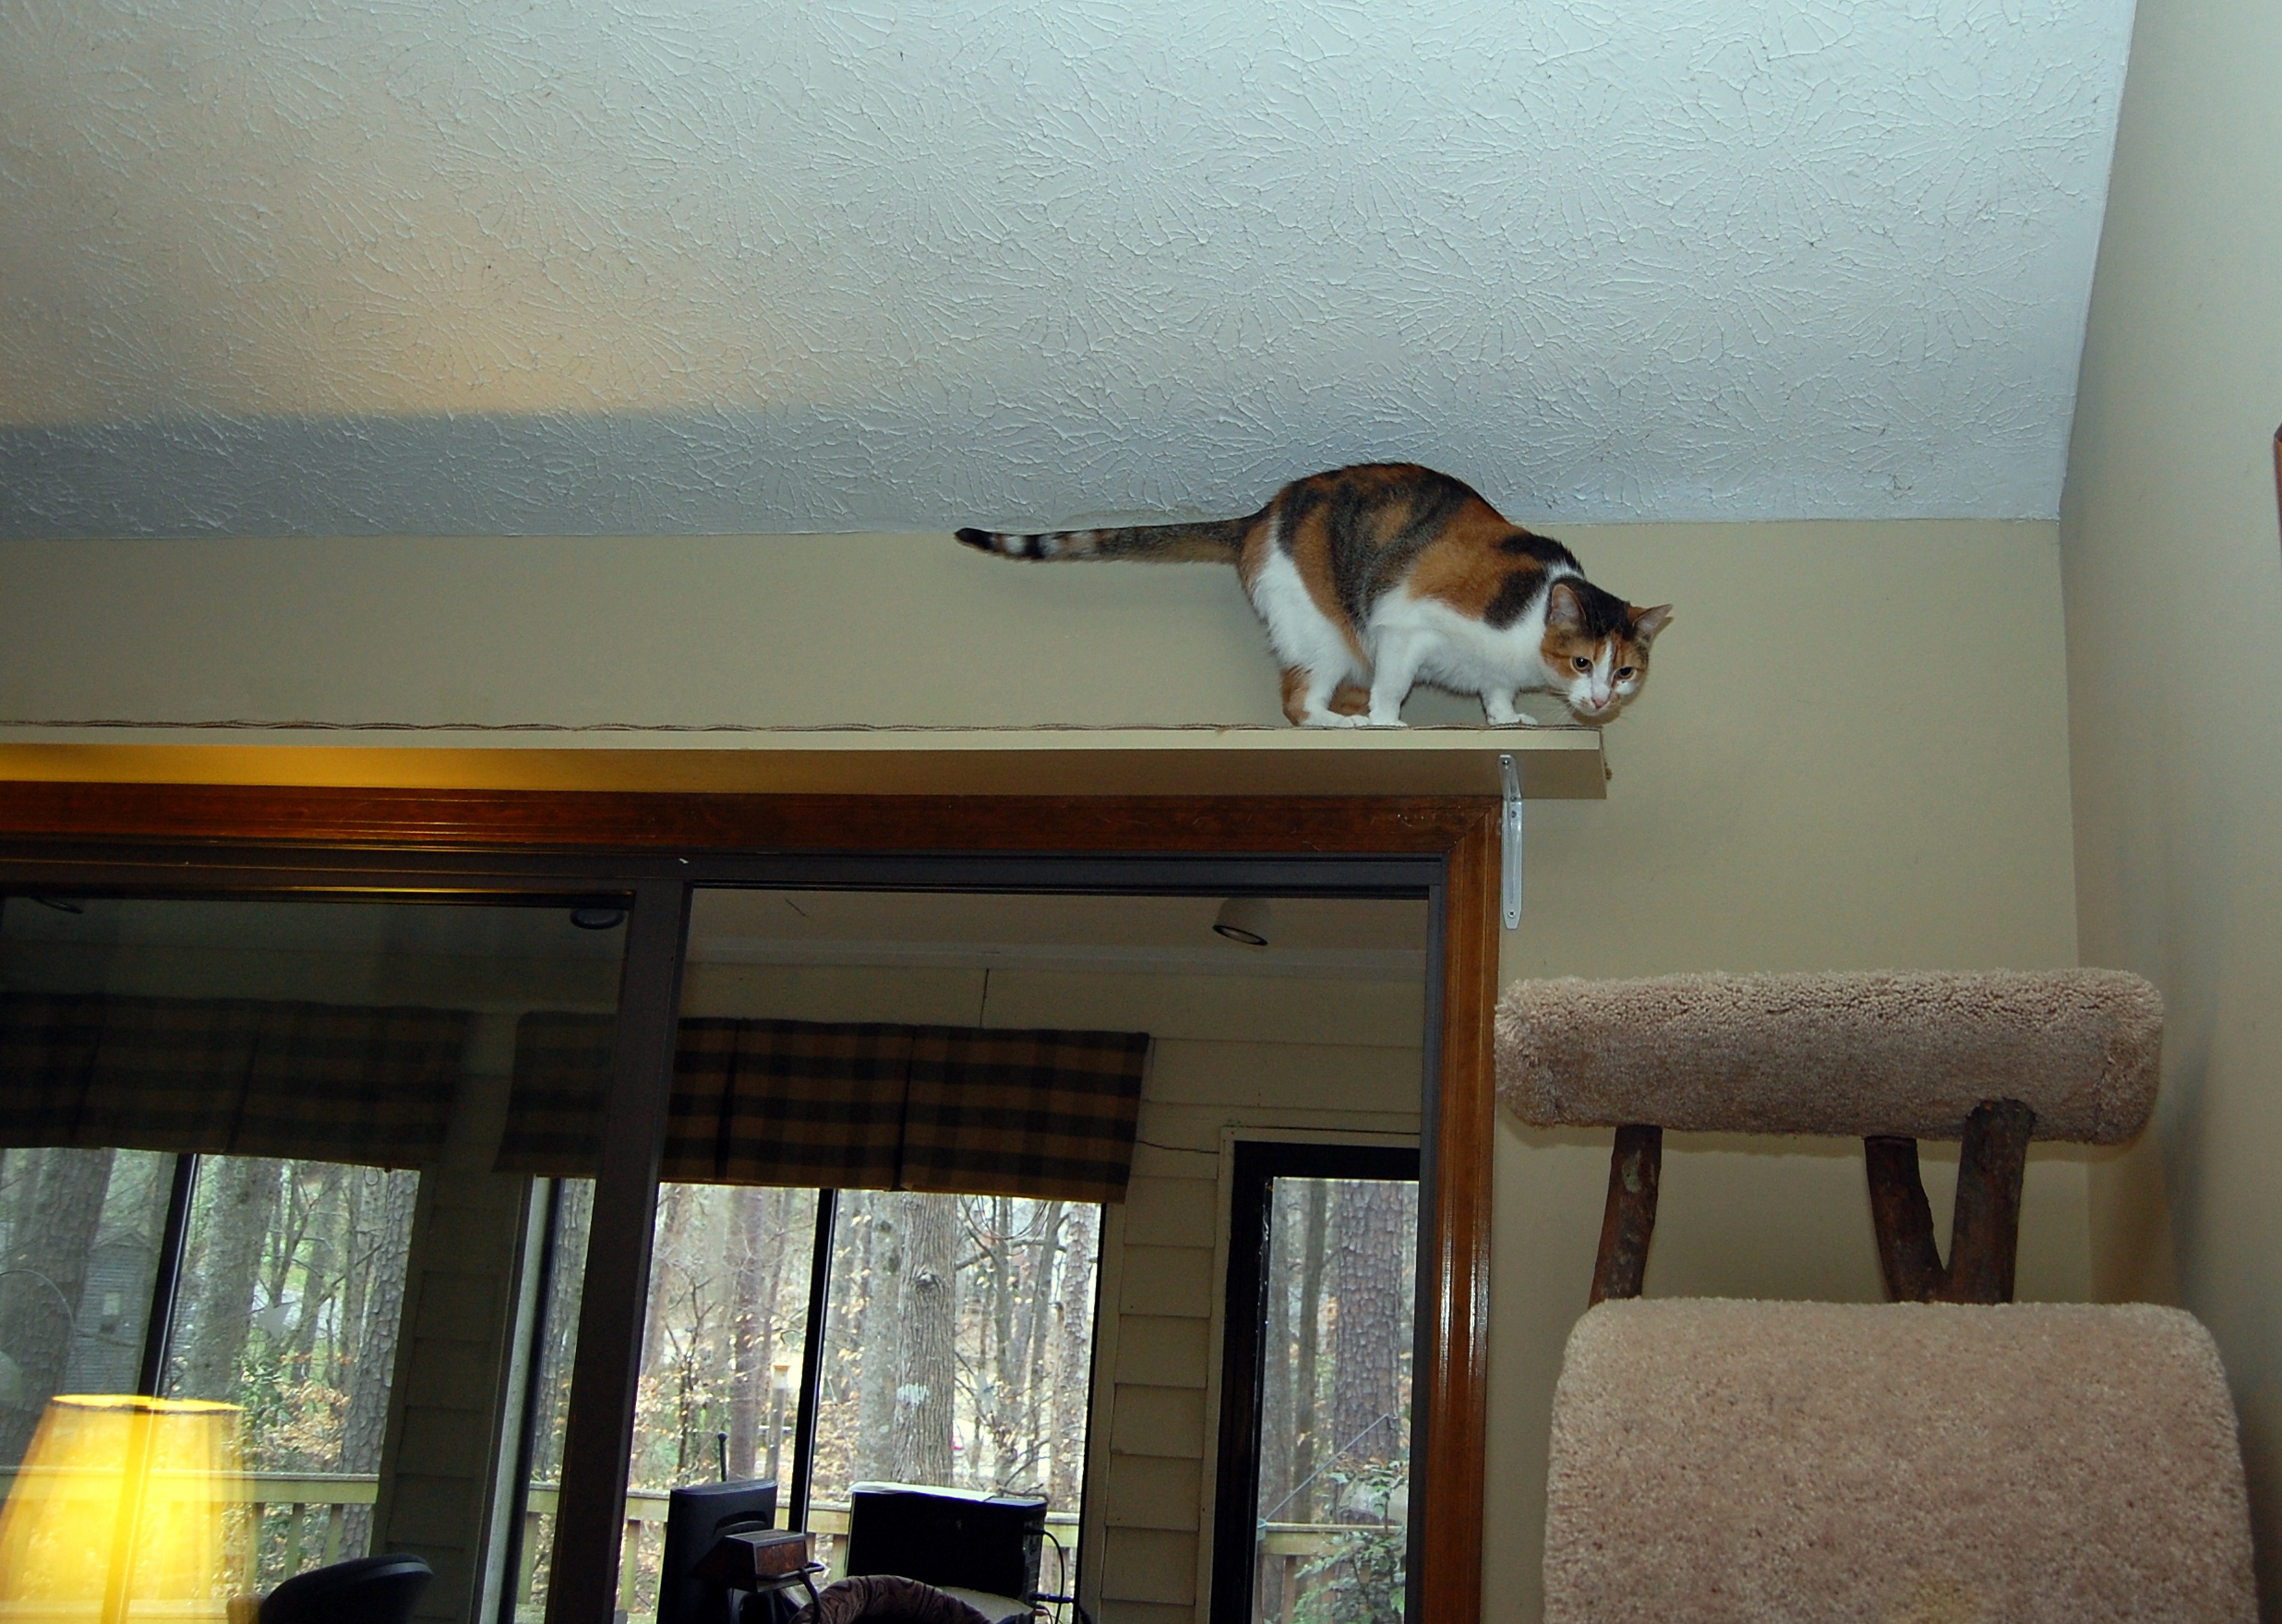 Lydia ascending sisaled runs to a traditional cat condo in the corner. 